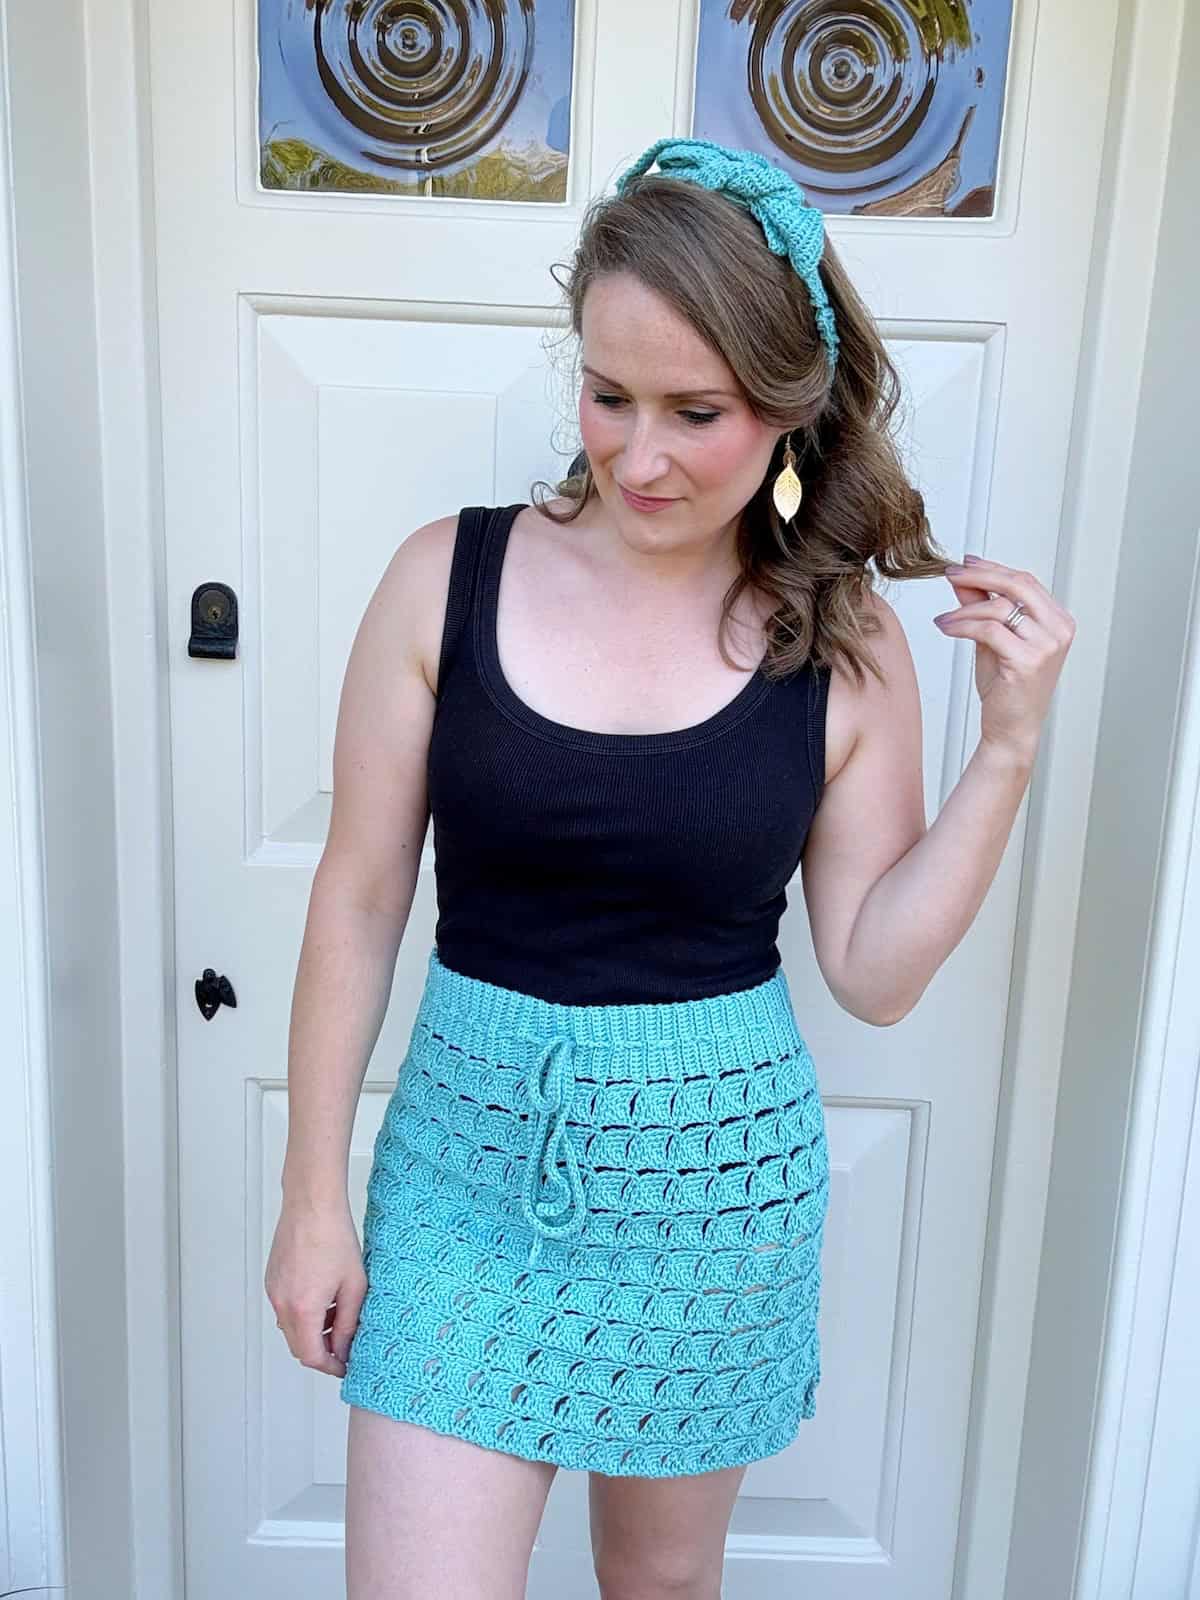 A woman stands in front of a white door wearing a black tank top and a turquoise crocheted skirt with a matching headband, looking down and to the side, touching her hair with her right hand. She seems to be admiring the intricate crochet skirt pattern she crafted. 